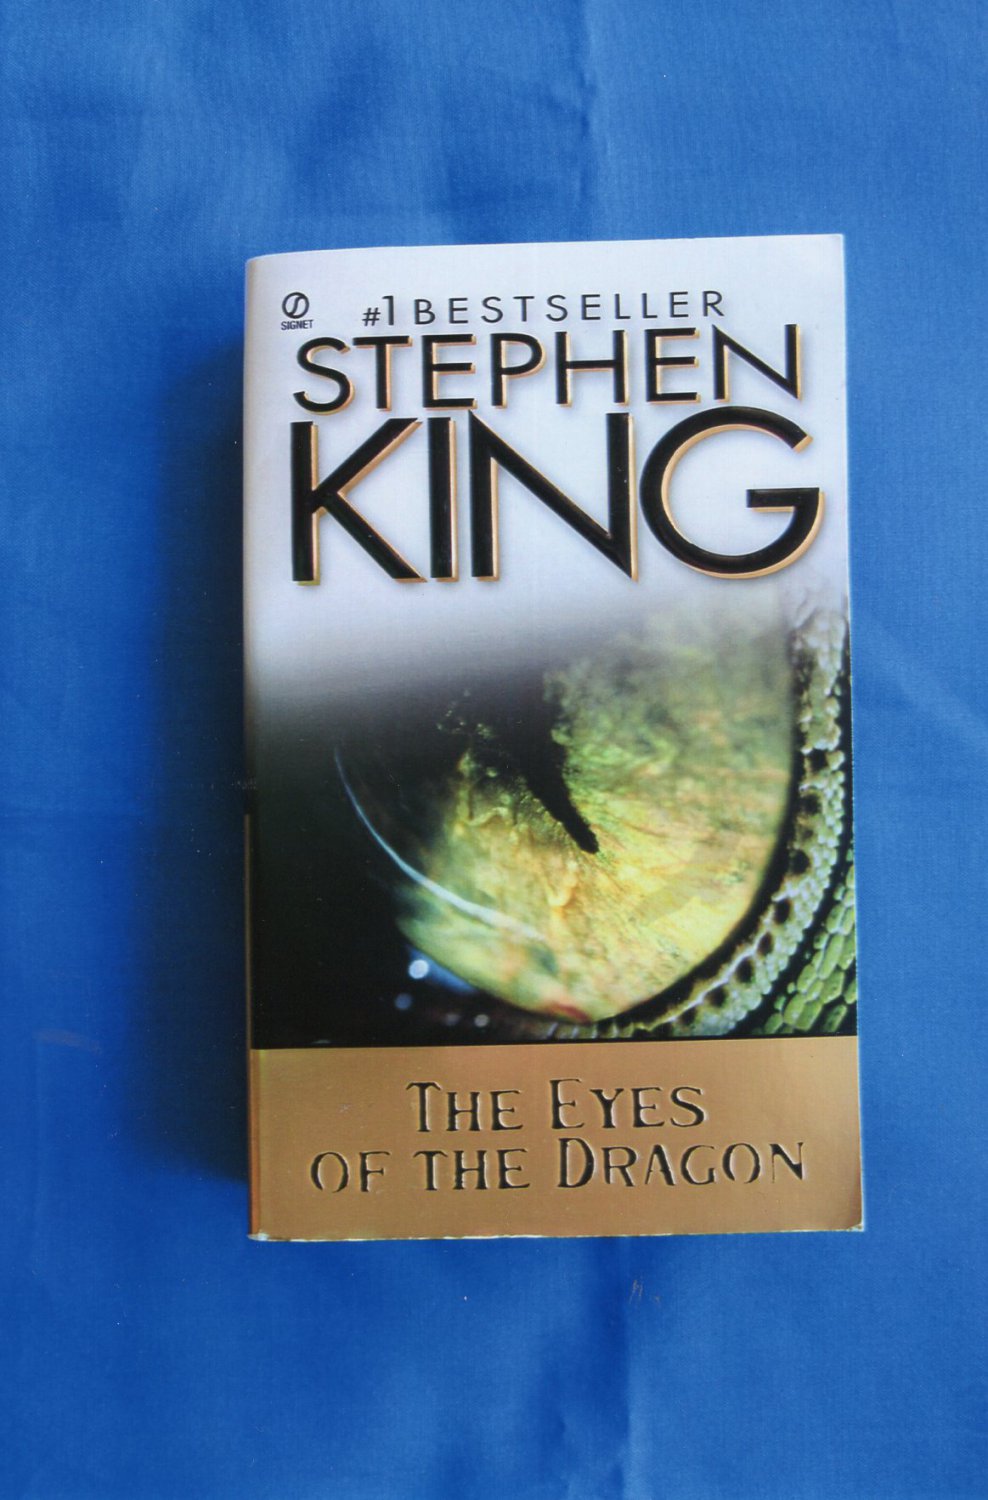 the eyes of the dragon by stephen king